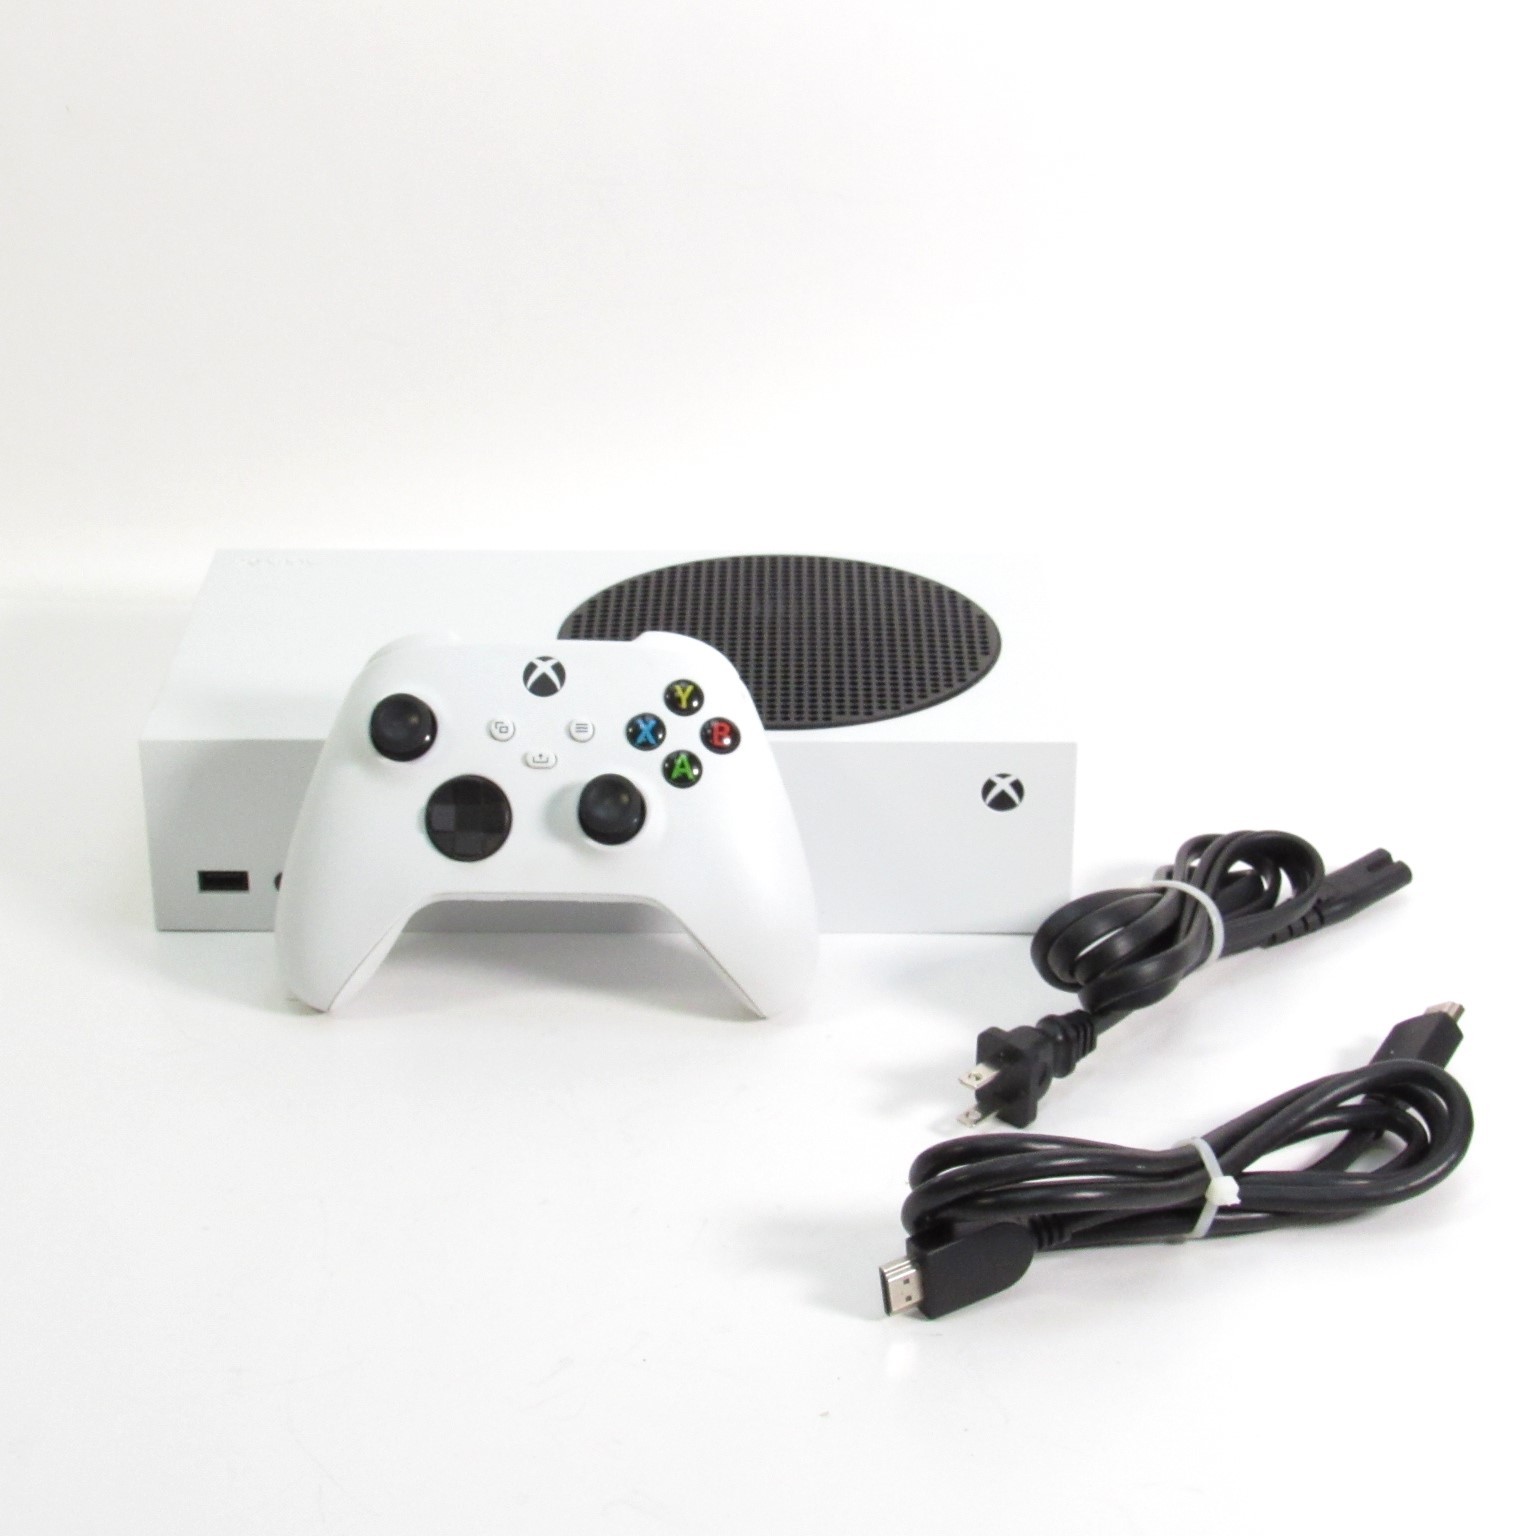 XBOX ONE S & XBOX SERIES S. - Ken's Buy Sell Pawn Shop